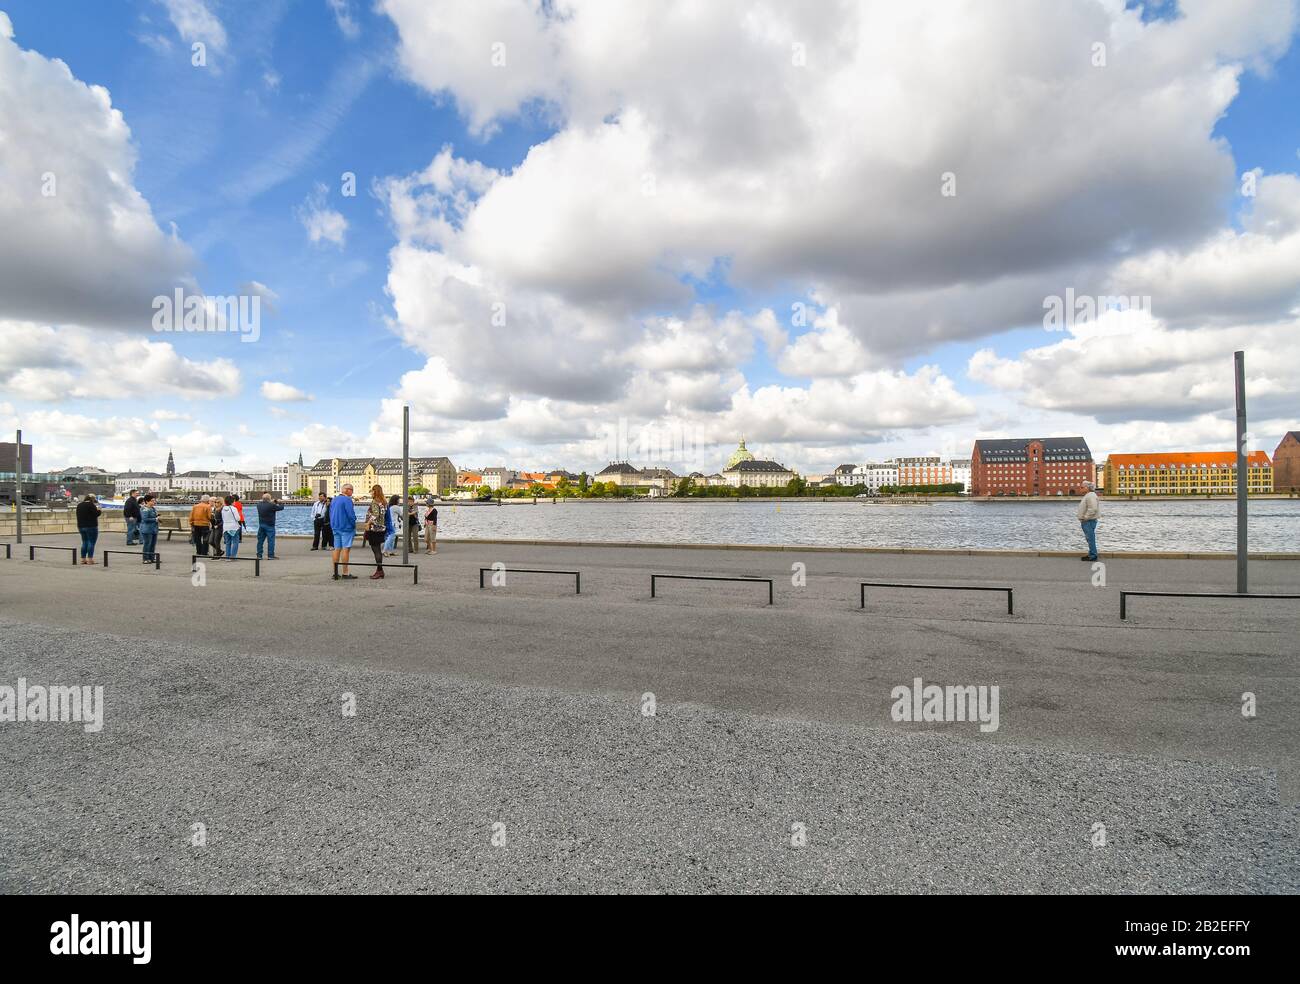 A group of tourists stand near the Opera House and along the waterfront on the island of Holmen and look across at the skyline of Copenhagen Denmark. Stock Photo